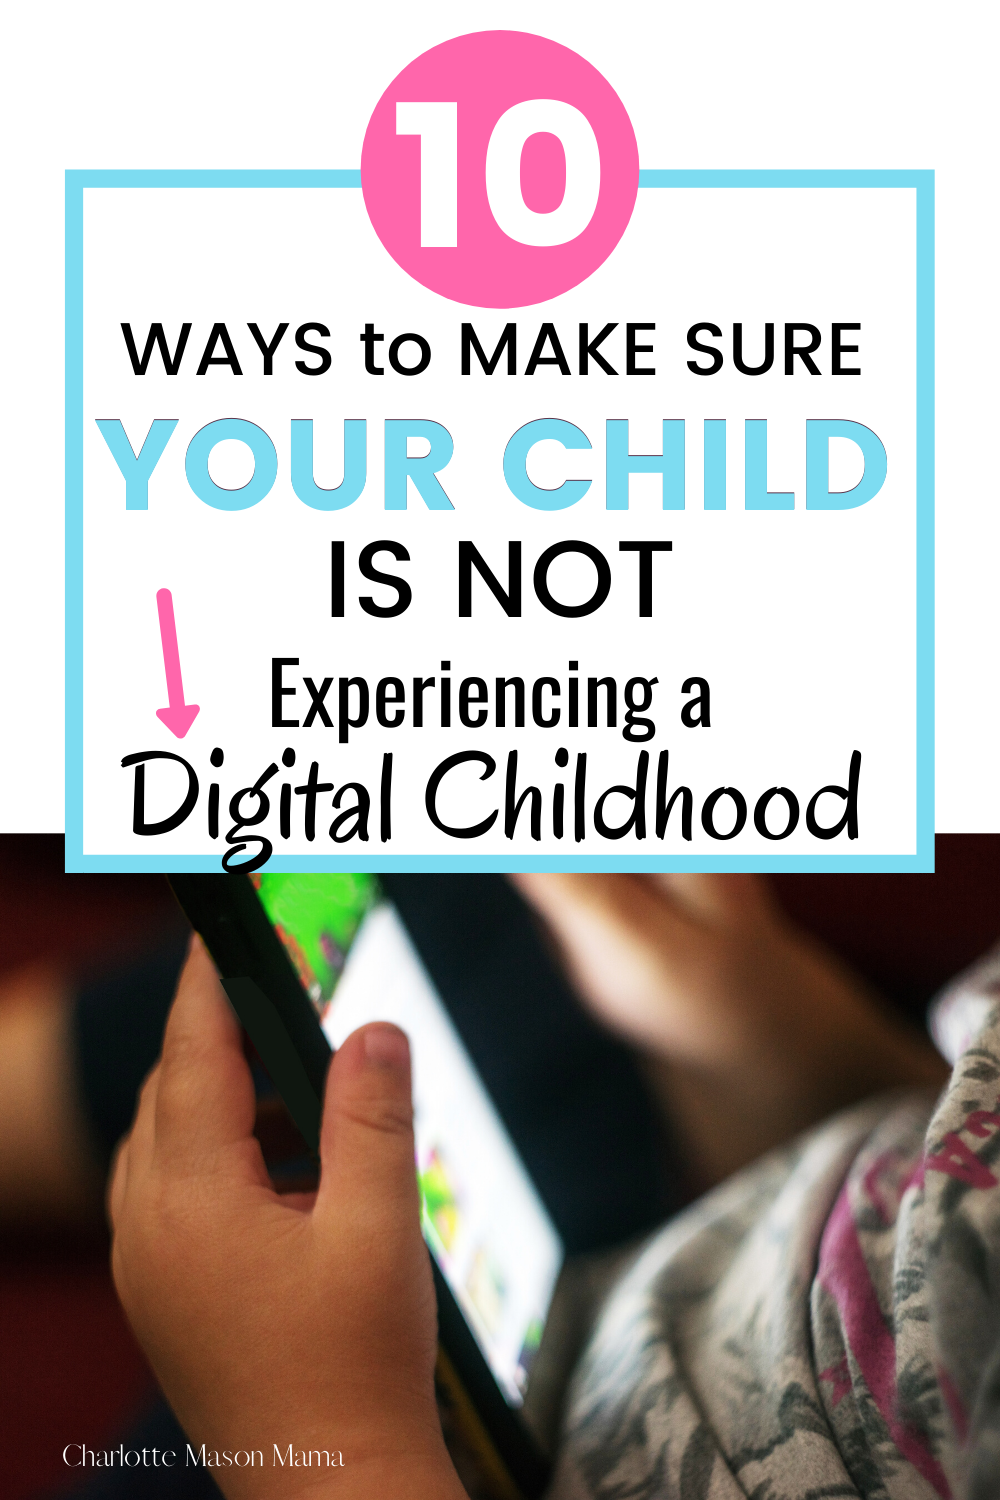 10 Ways to Make Sure YOUR CHILD is not experiencing a Digital Childhood